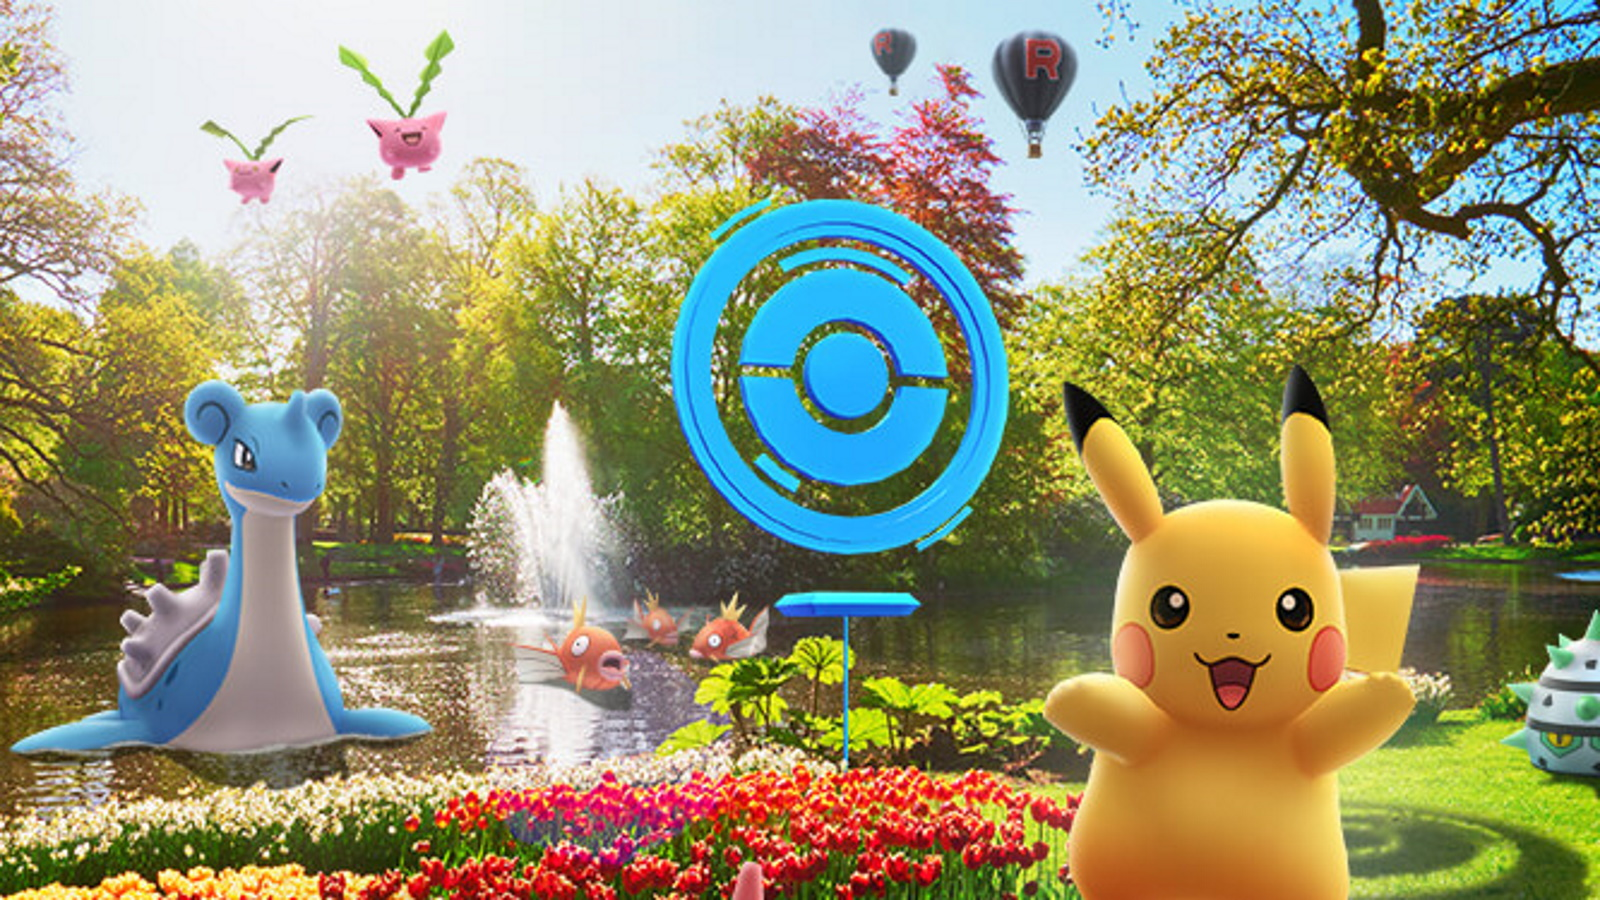 Pokémon GO - Get ready for your next adventure with monthly item bundles  from Pokémon GO and Prime Gaming ! 👉gaming..com/pokemongo